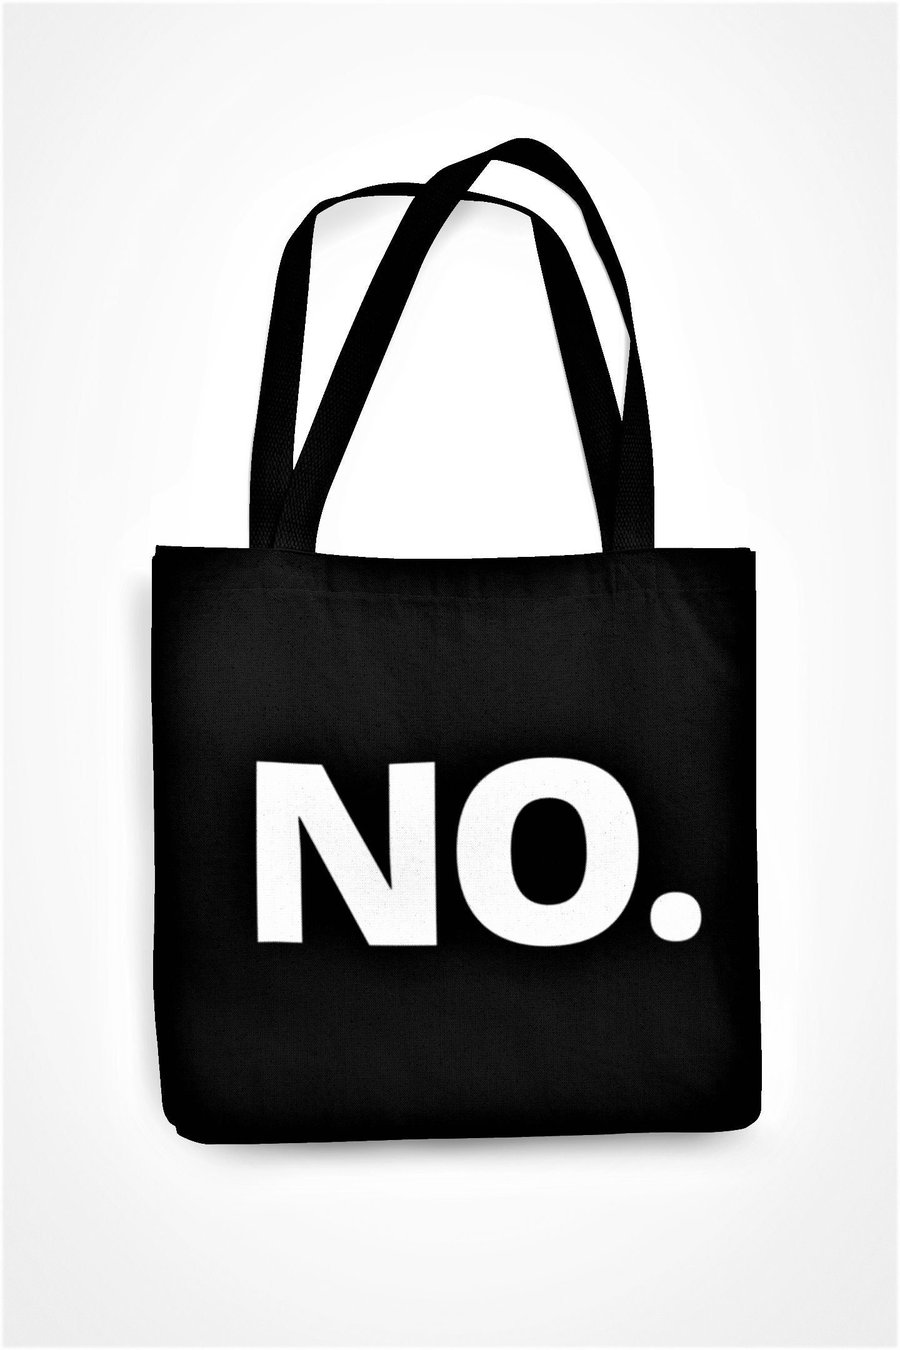 No Tote Bag Funny Sassy Sarcastic Text Bag Funny Gift For Anti Social Friends 